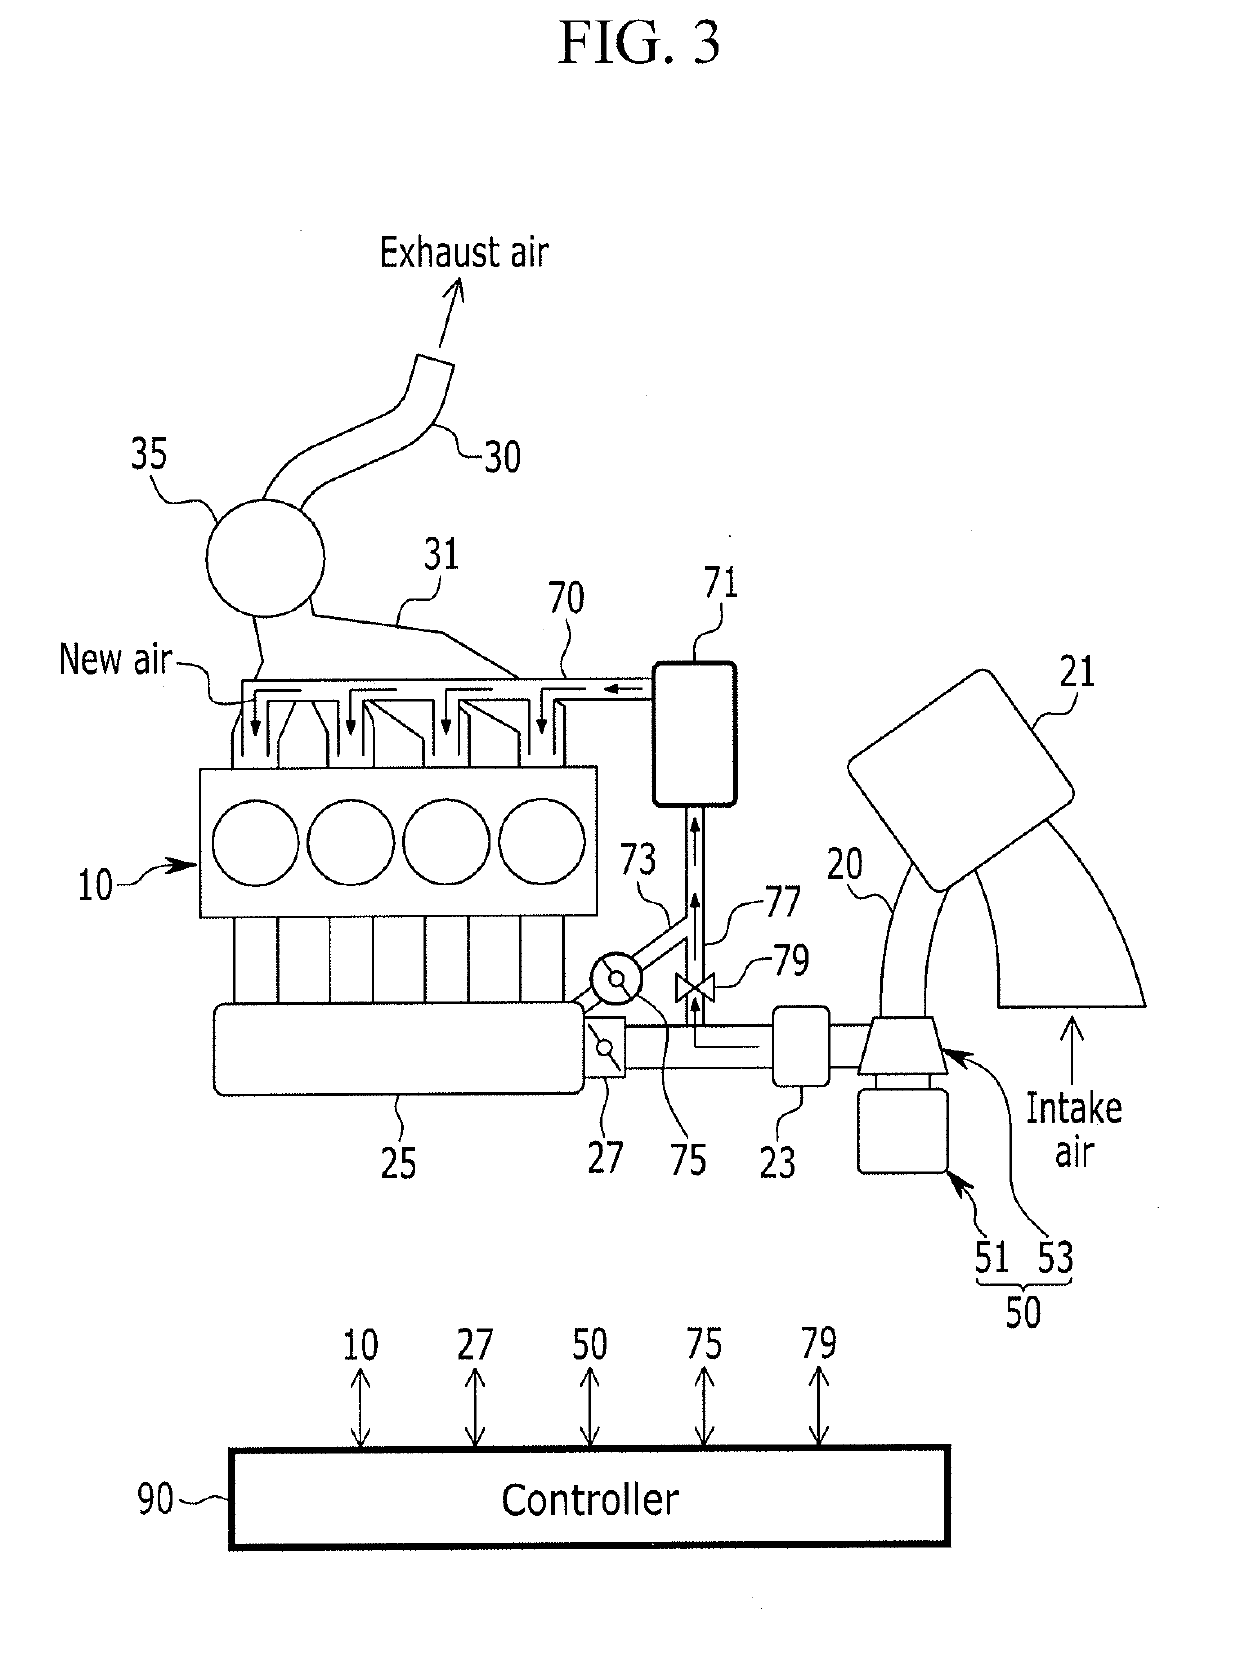 Secondary air injection system